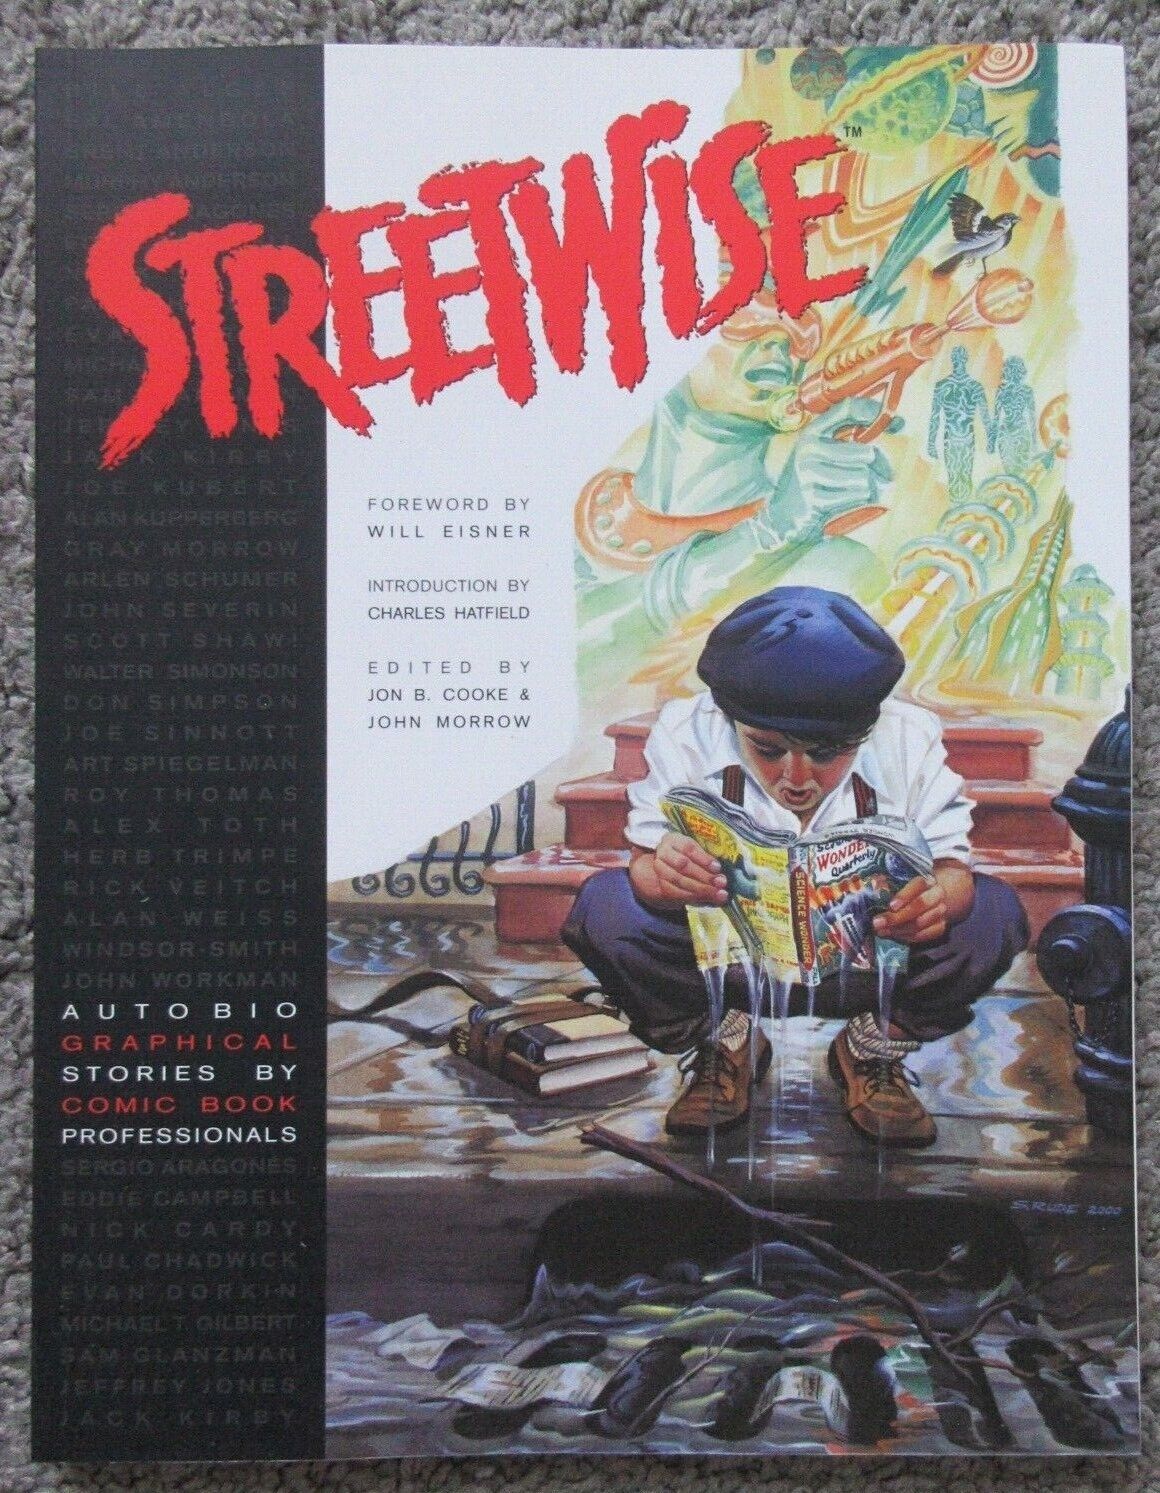 MINT NEW 2000 STREETWISE MORROW COOKE FIRST PRINT JULY COMIC PROFESSIONALS